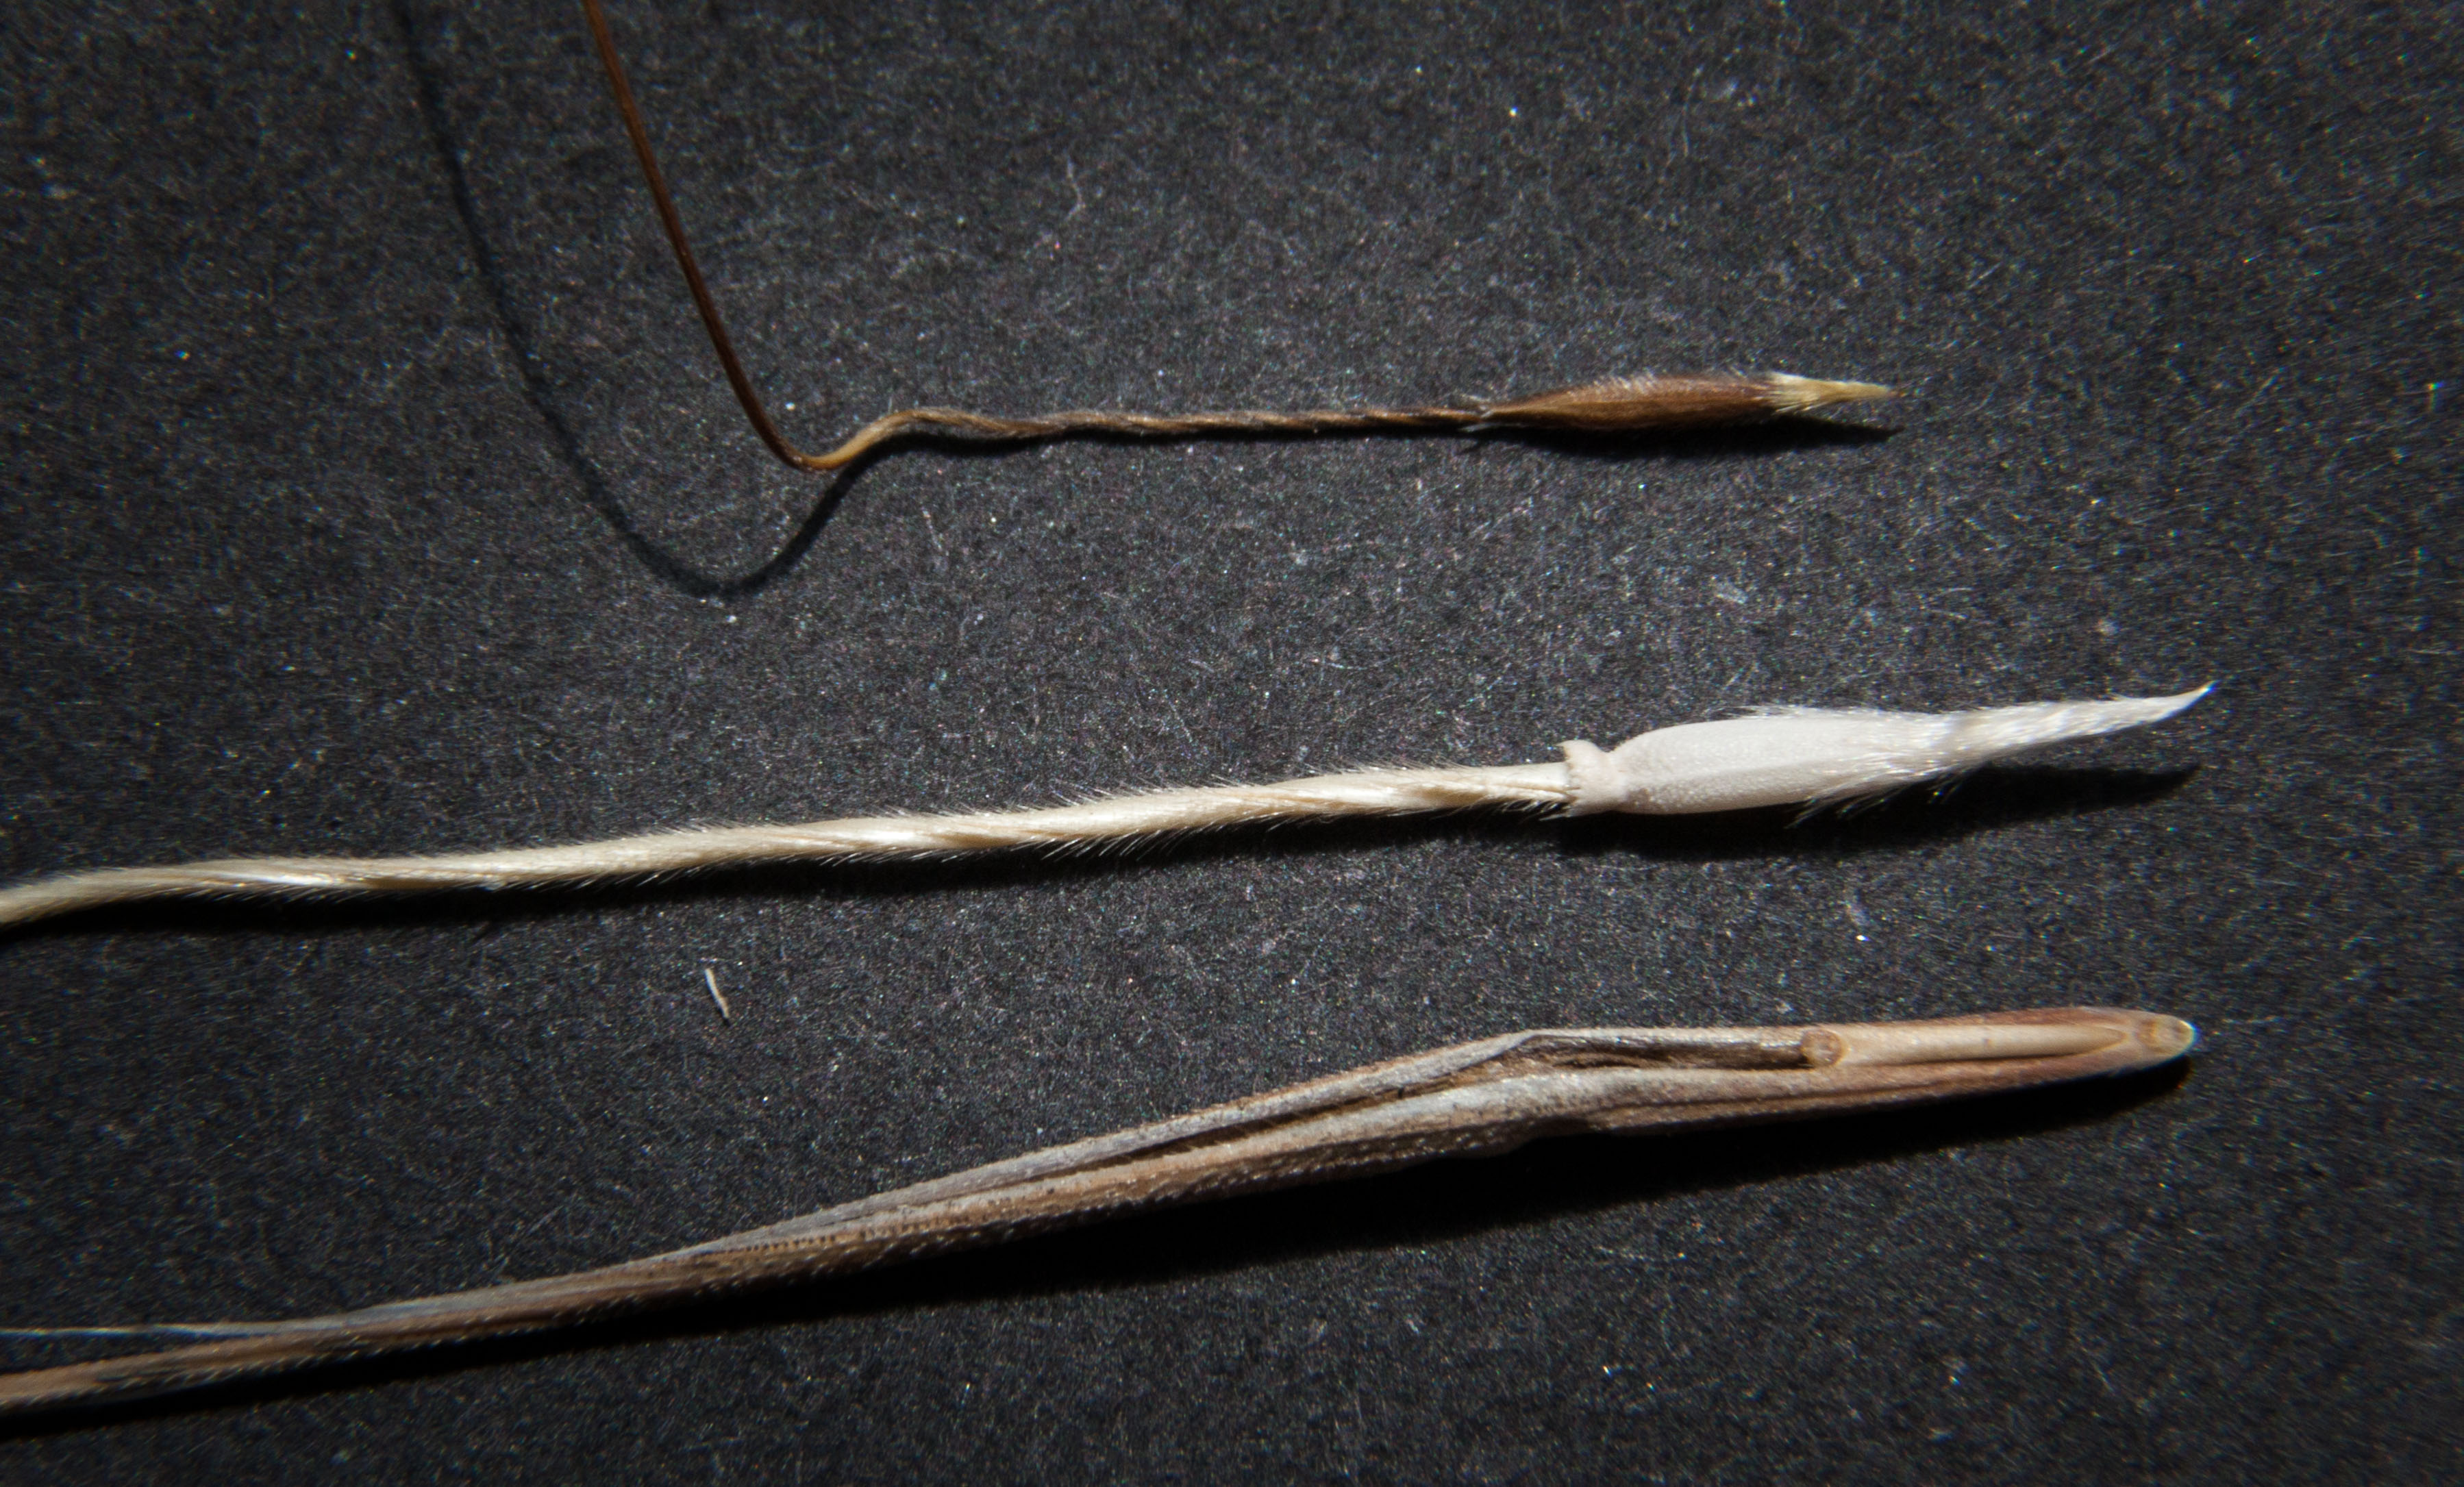 Comparison of common needlegrass and CNG. The main difference is the seedhead collar on CNG seed and its absence in the common needle grass seeds. 